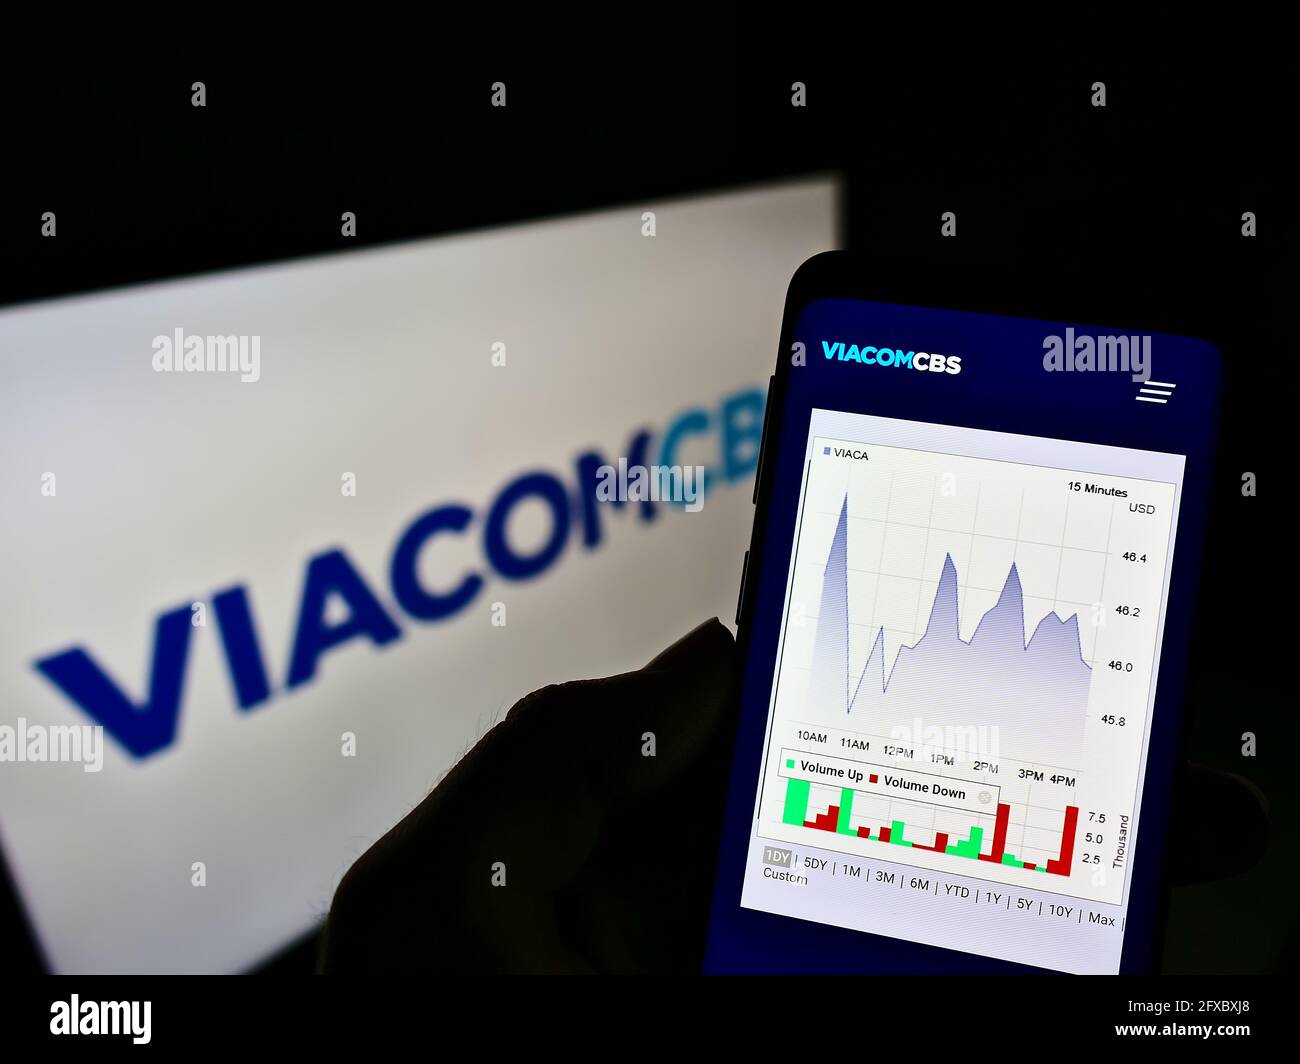 Person holding cellphone with webpage and chart of US mass media company ViacomCBS Inc. on screen in front of logo. Focus on center of phone display. Stock Photo